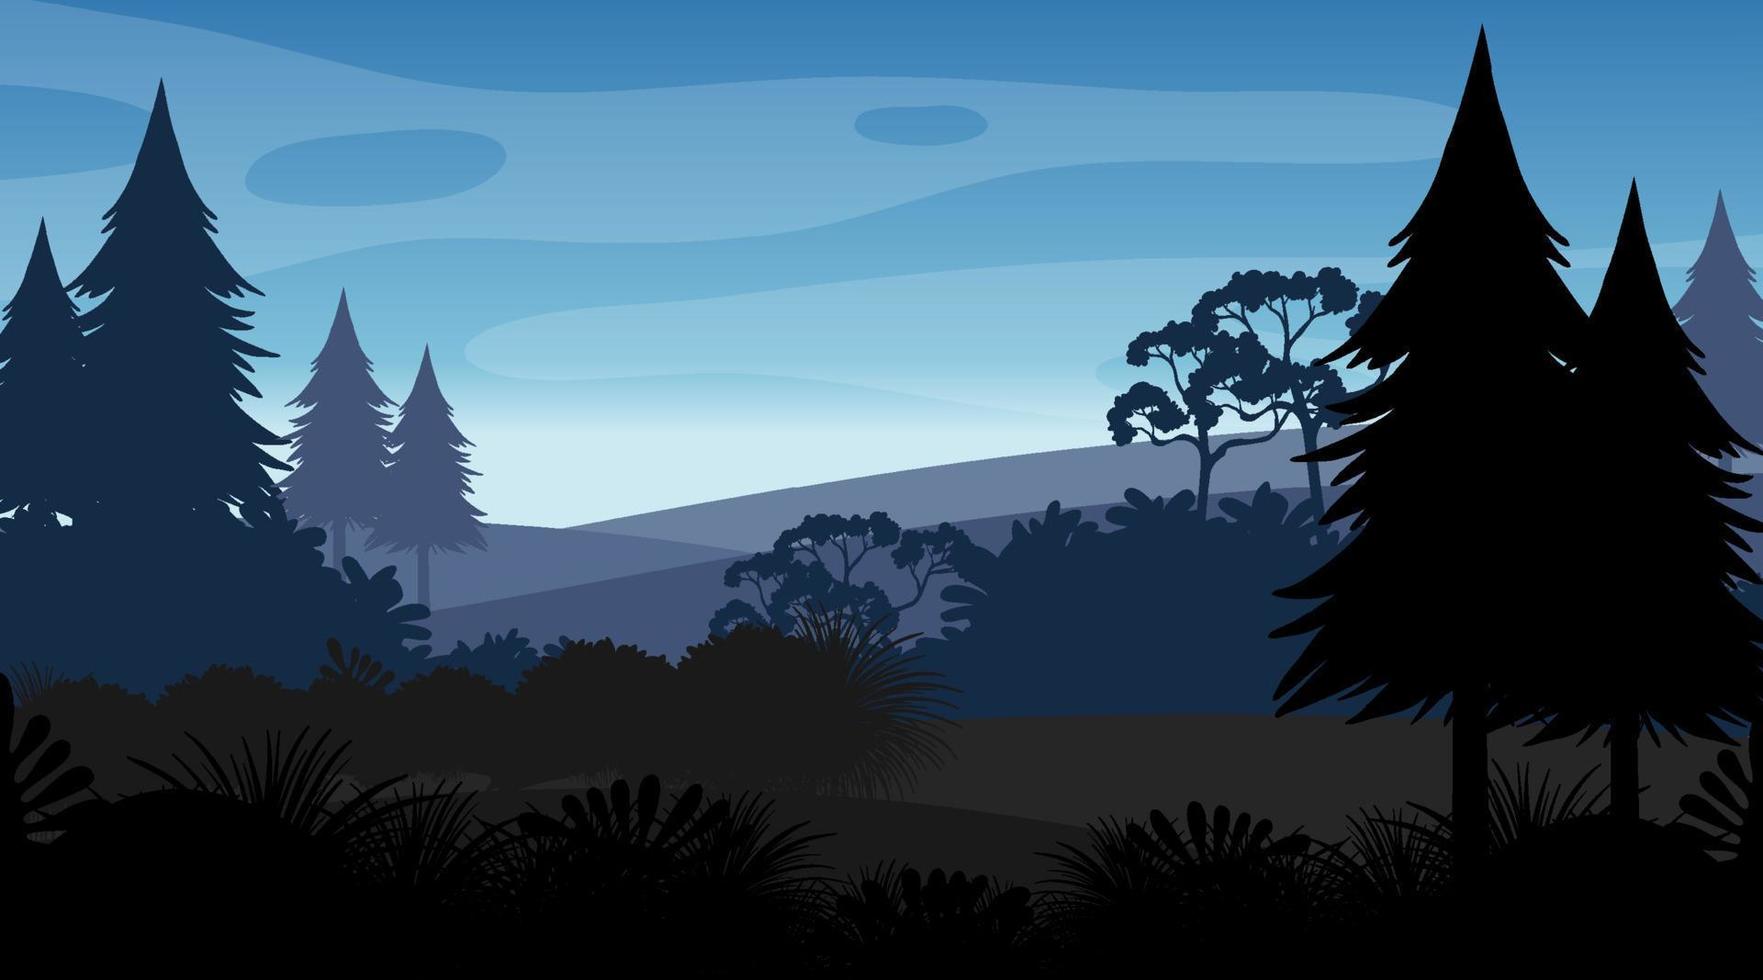 Silhouette forest landscape background vector